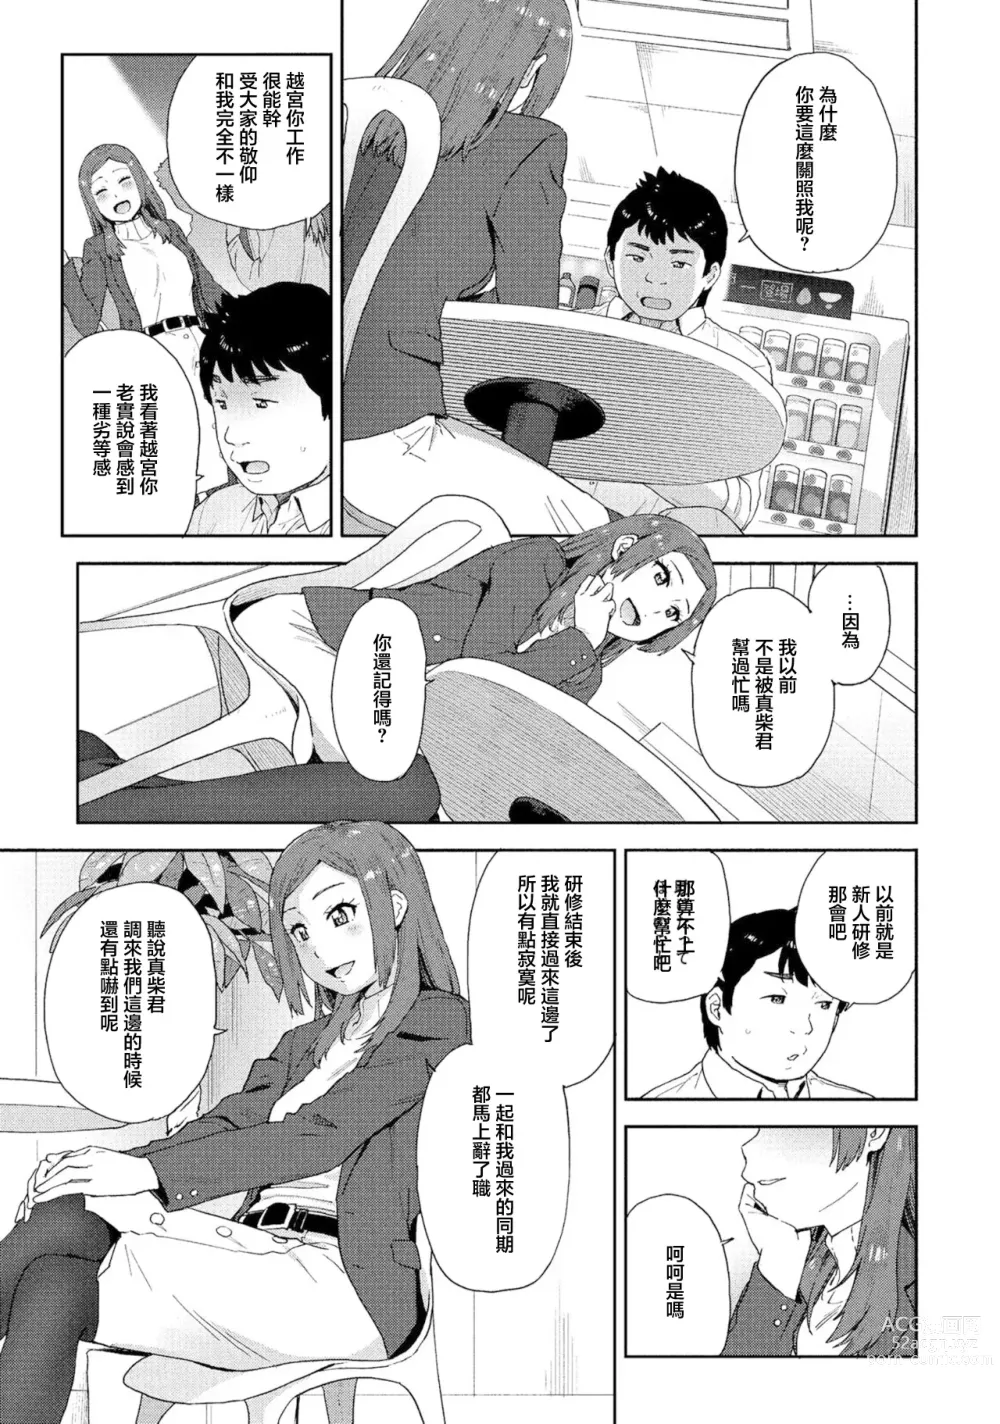 Page 5 of doujinshi 可靠依賴性